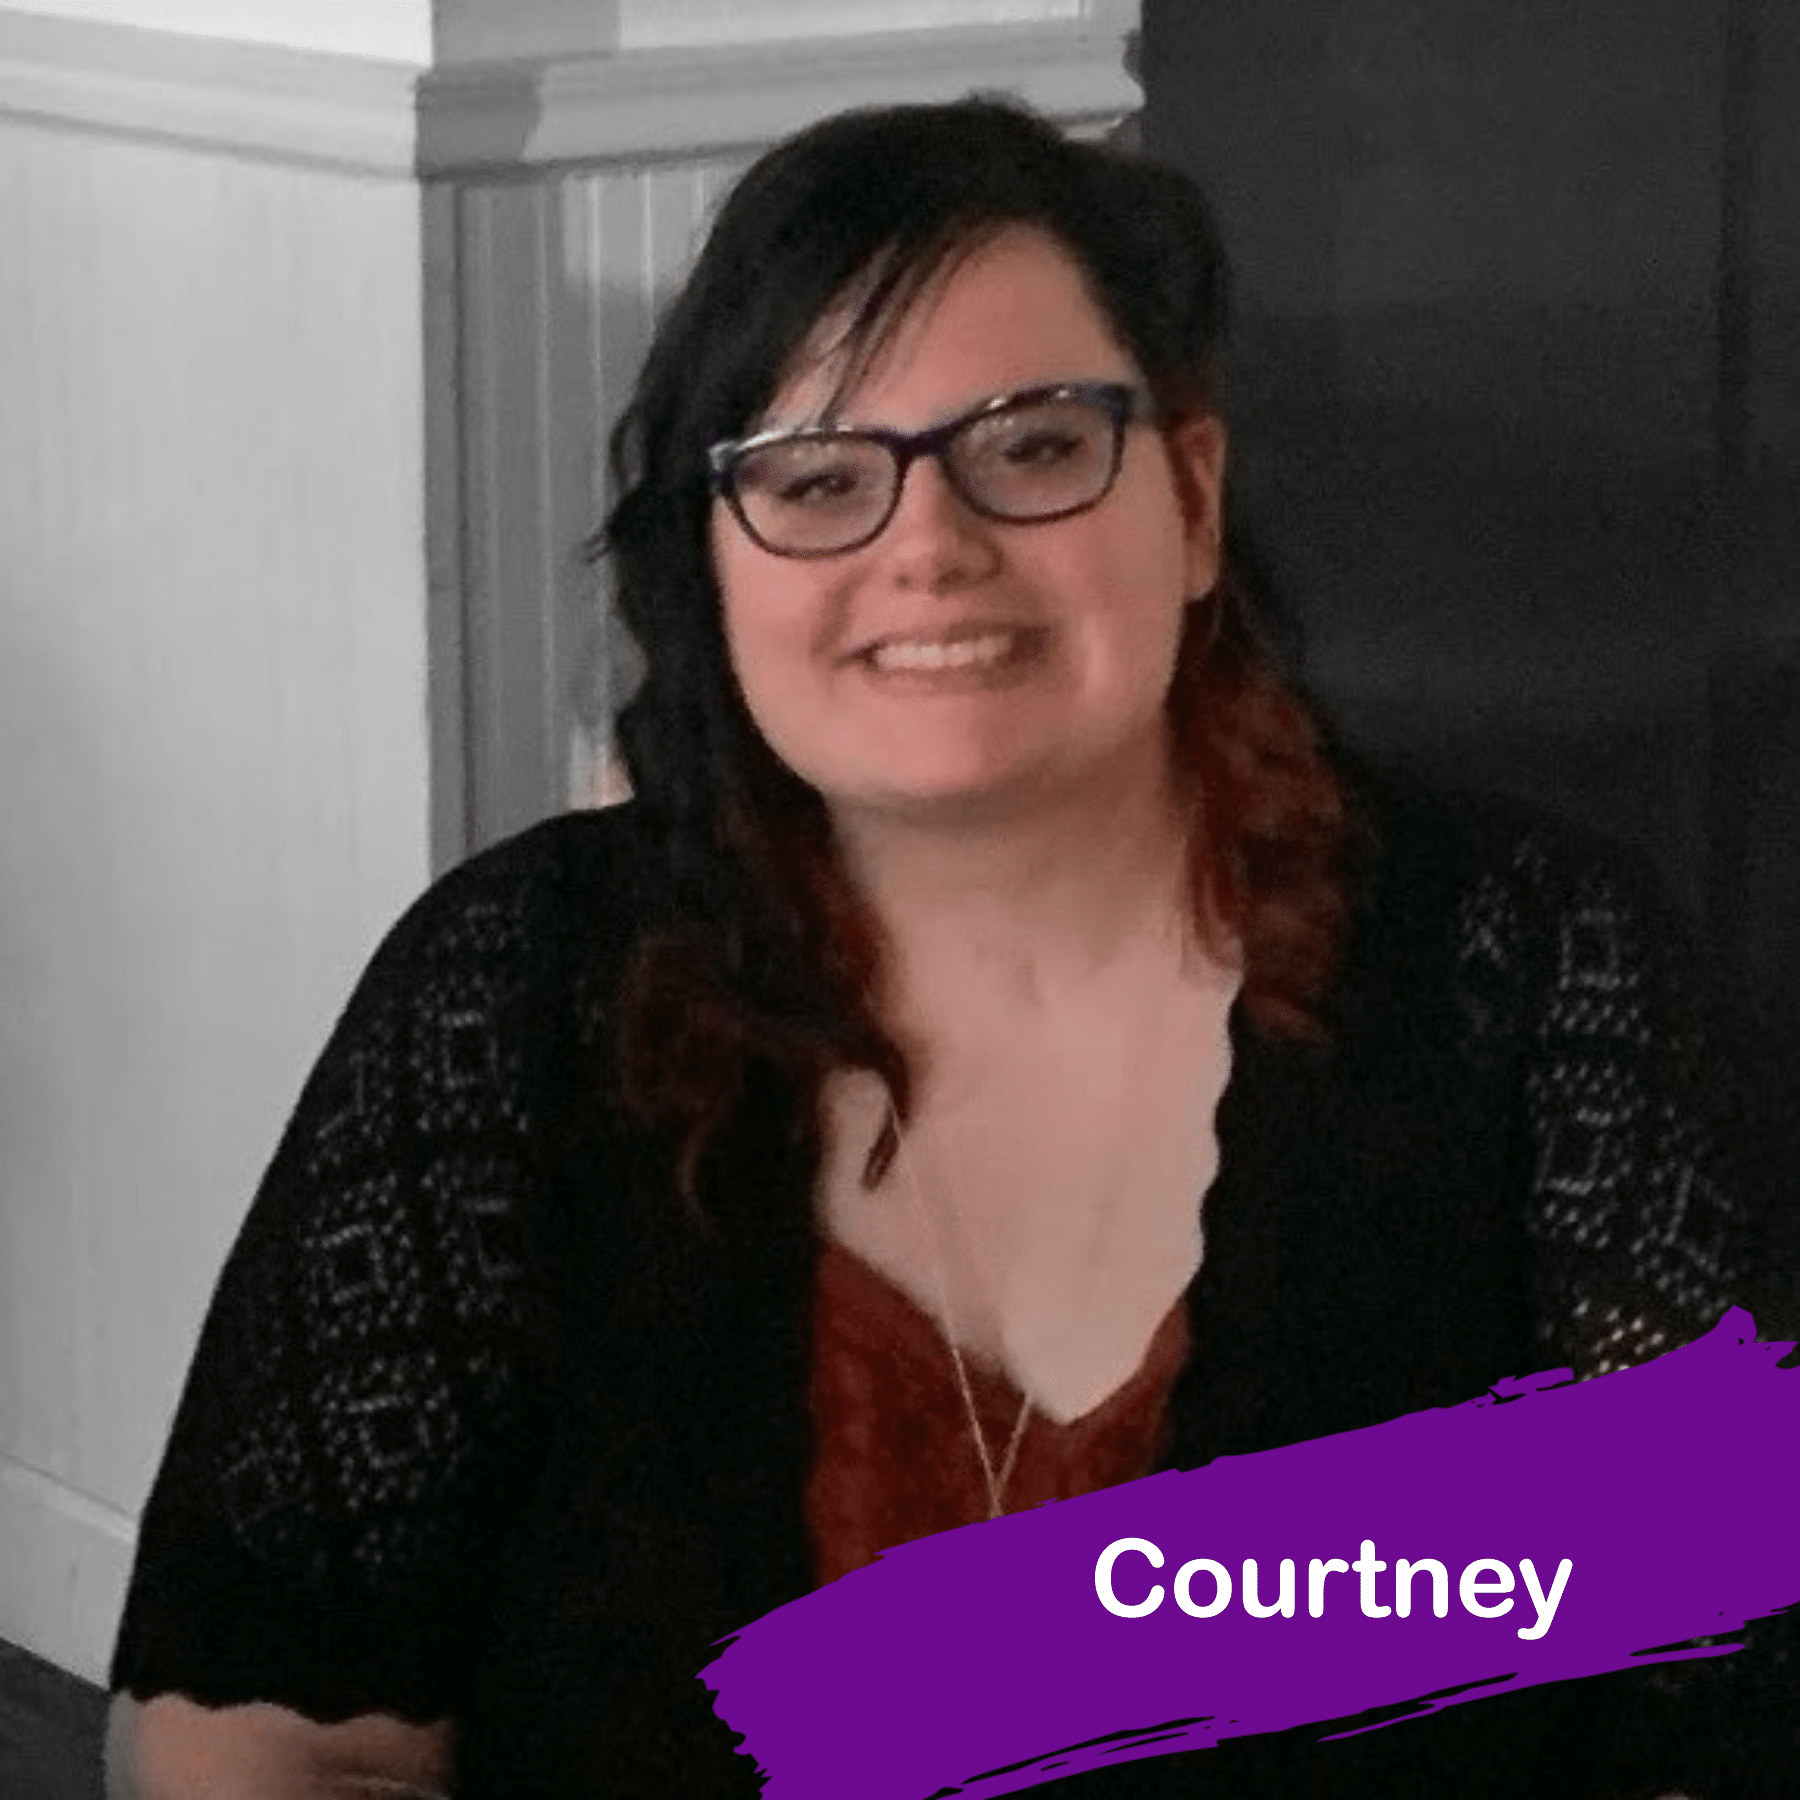 A photo of Courtney. She has long dark hair and she is wearing glasses and smiling.